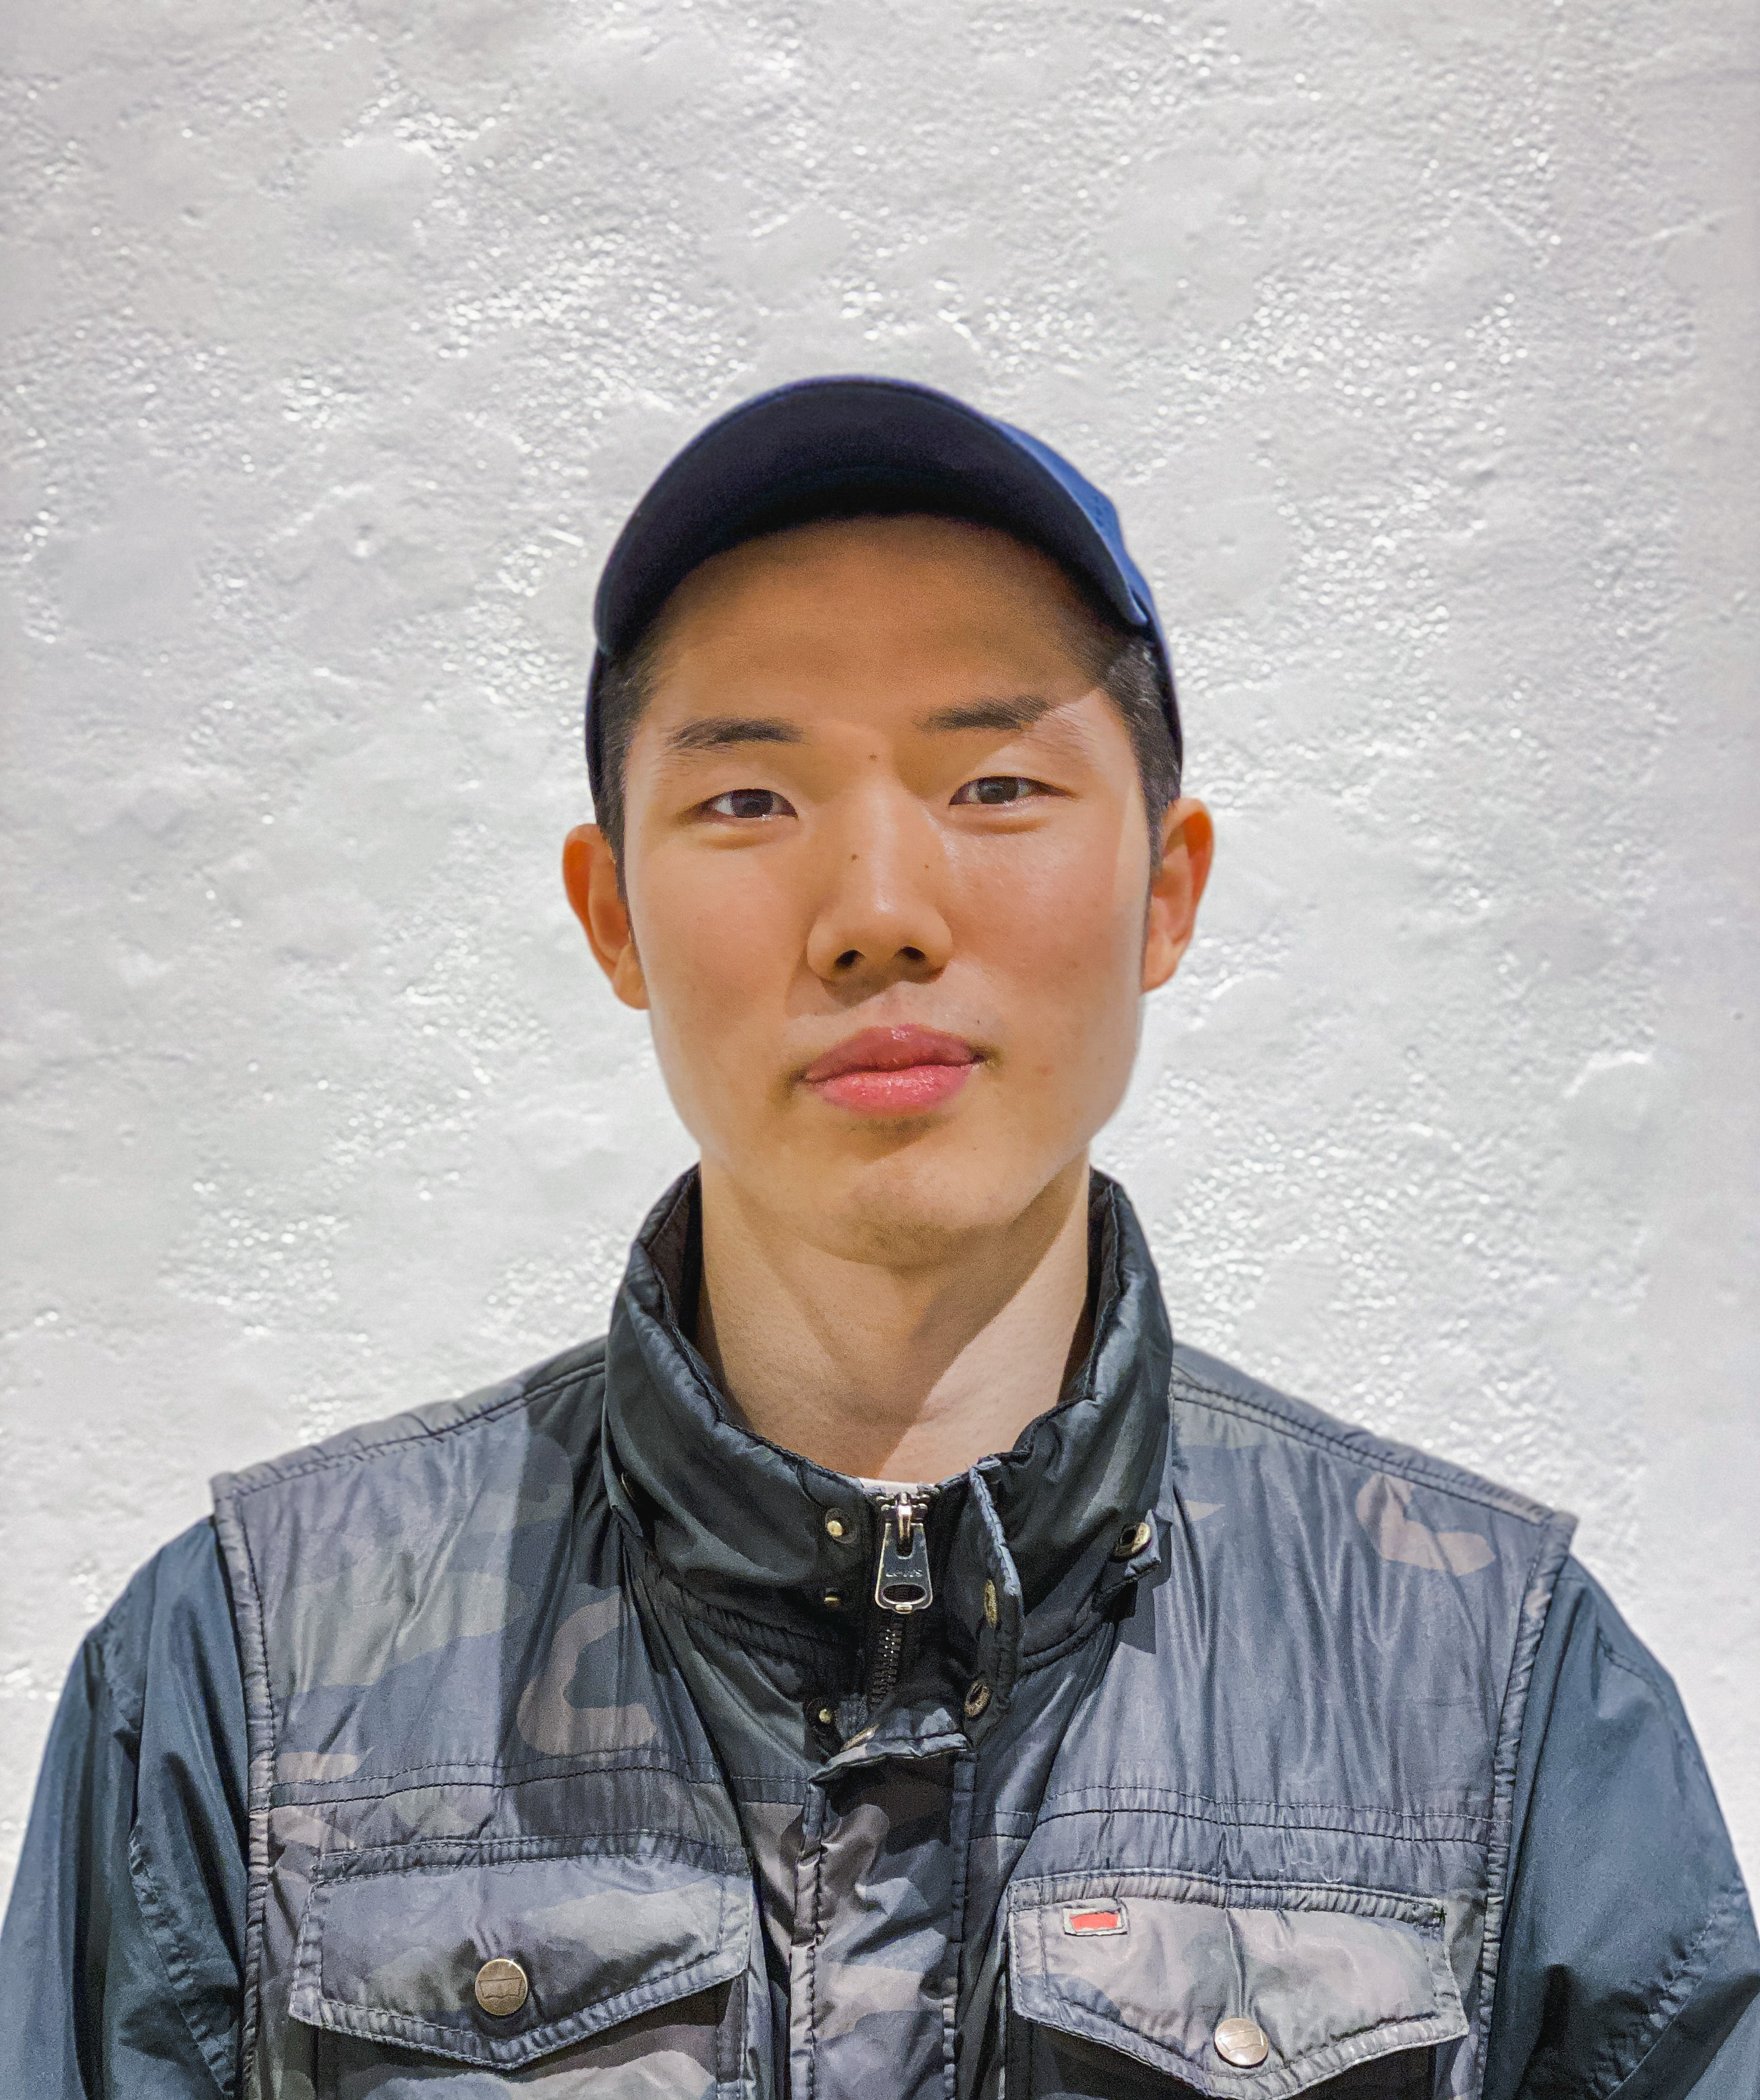 Headshot of Seuil Chung. He is wearing blue camouflage puffer vest, a blue baseball cap, and is standing in front of a textured white wall.